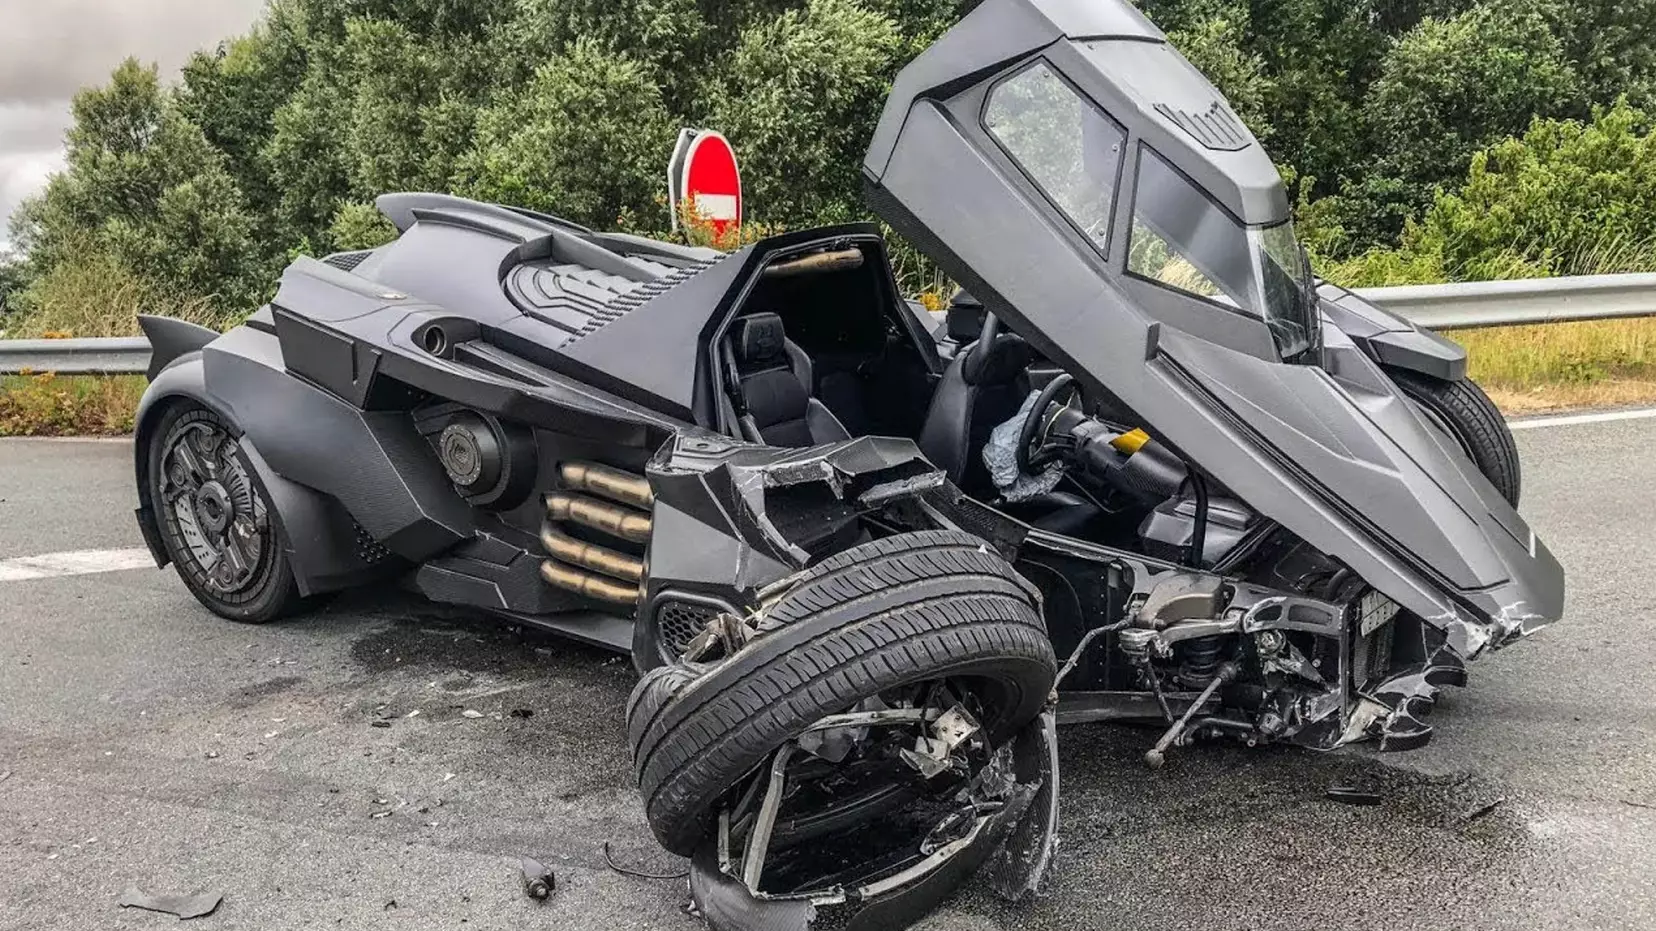 The Bat-Mobile following the collision with the other car /